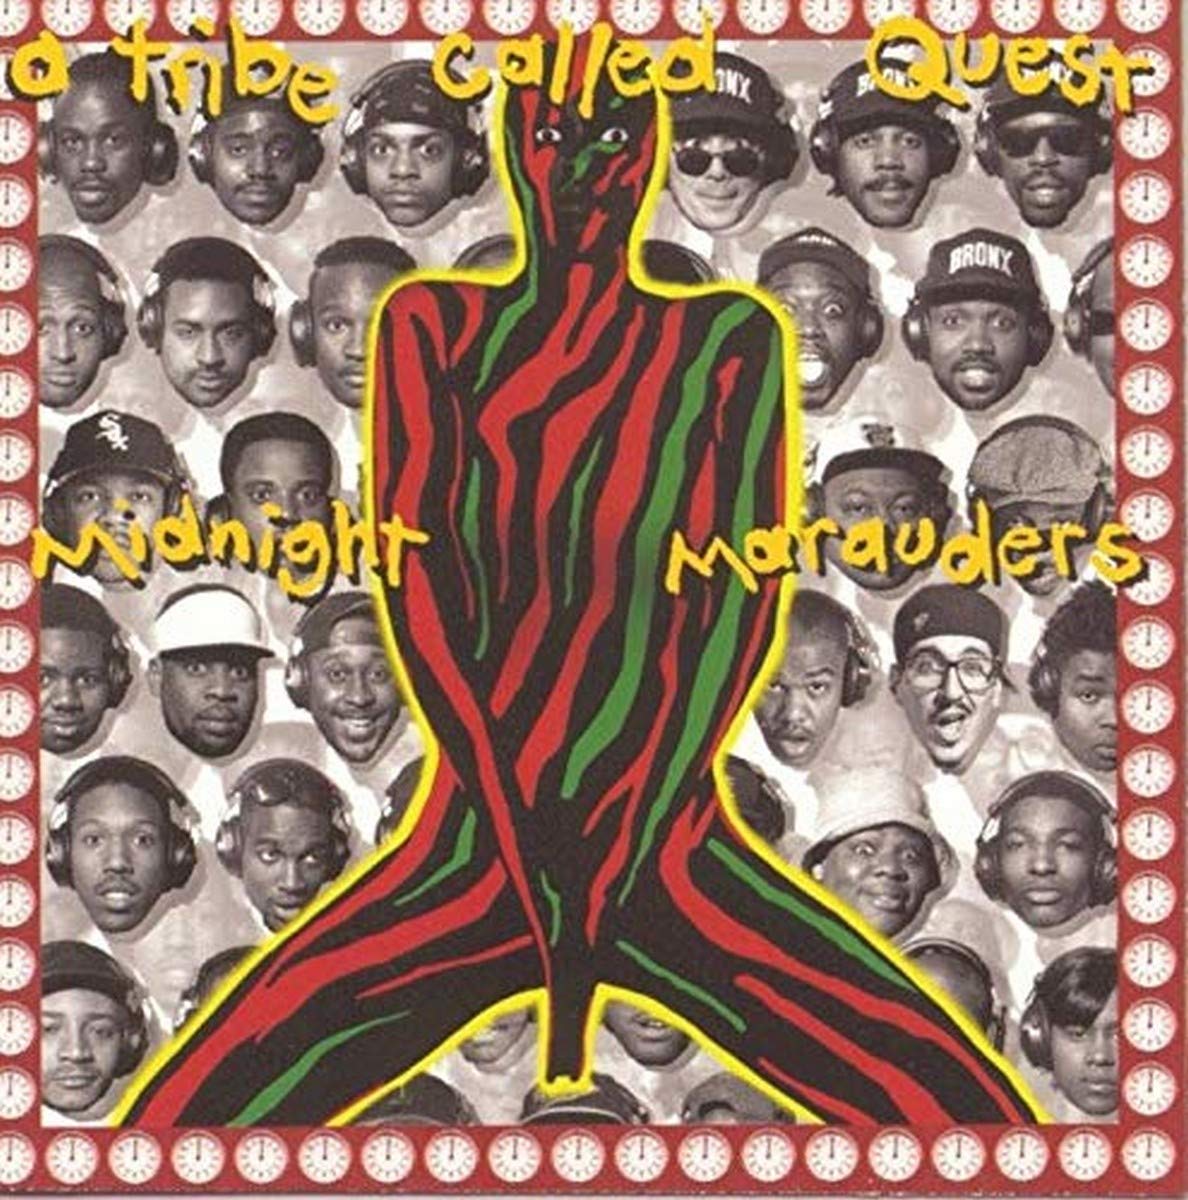 Midnight Marauders: A Tribe Called Quest